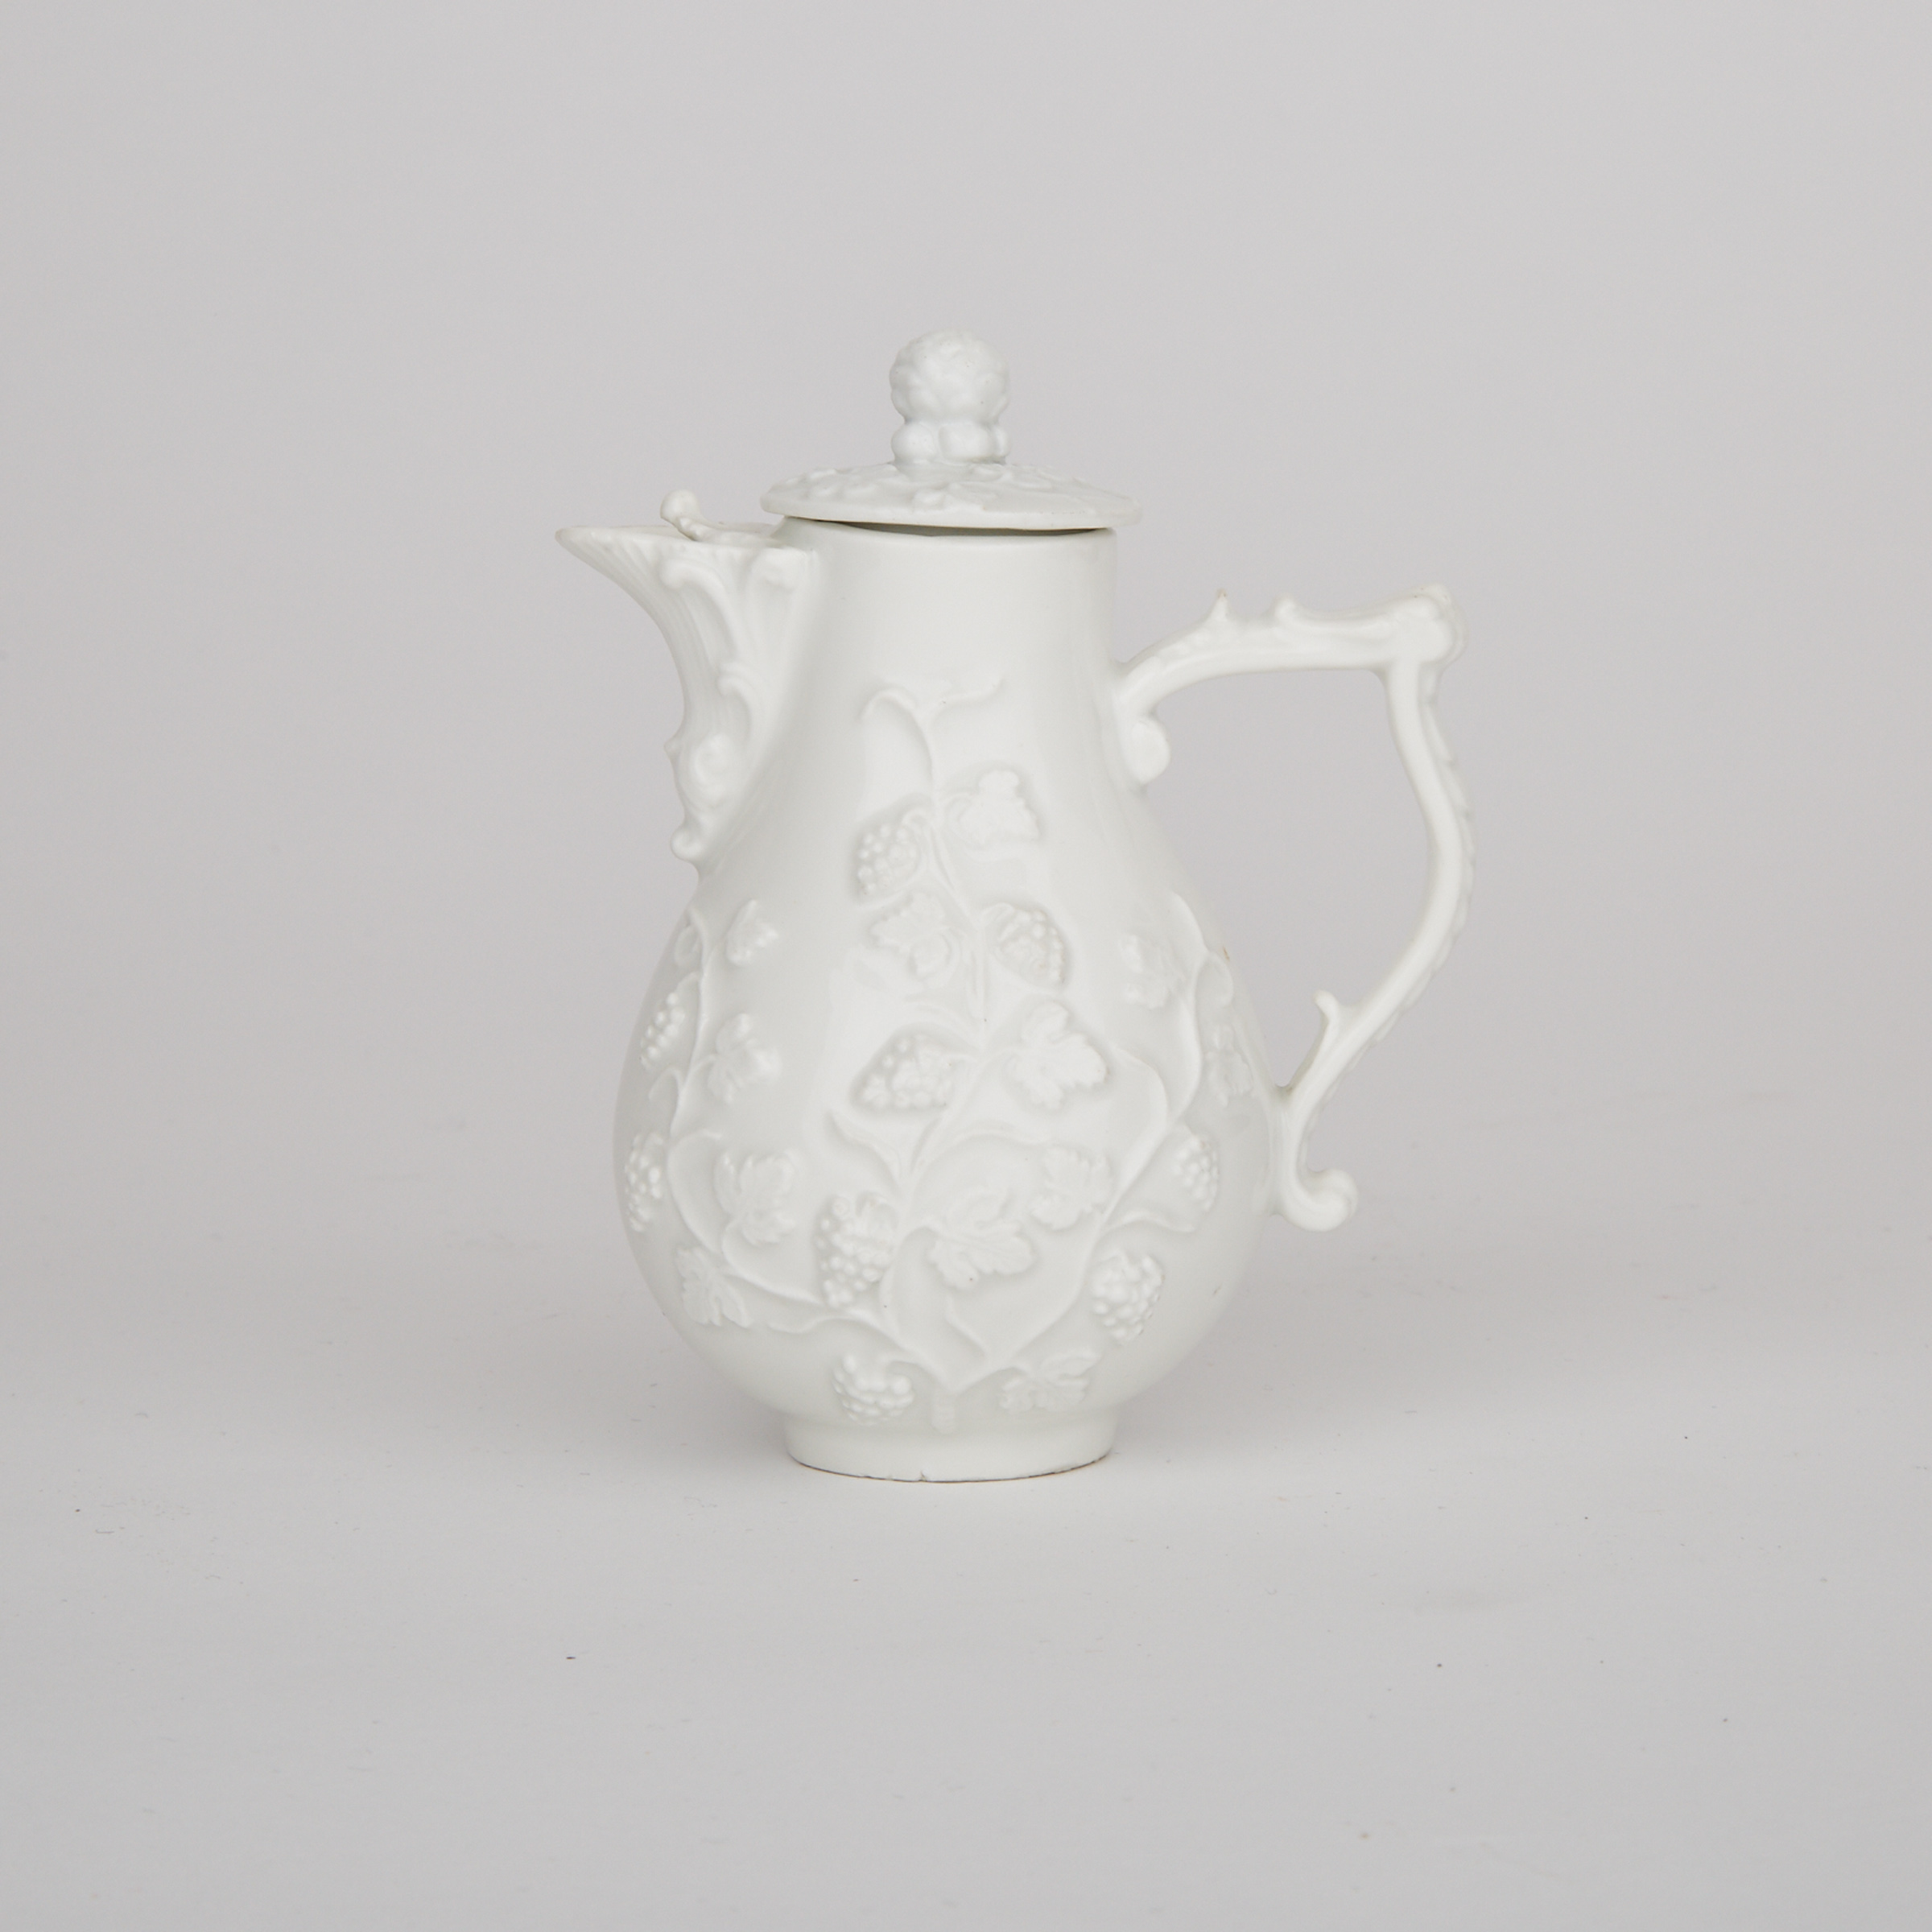 Meissen White Glazed Moulded Cream Jug with a Cover, c.1730-40